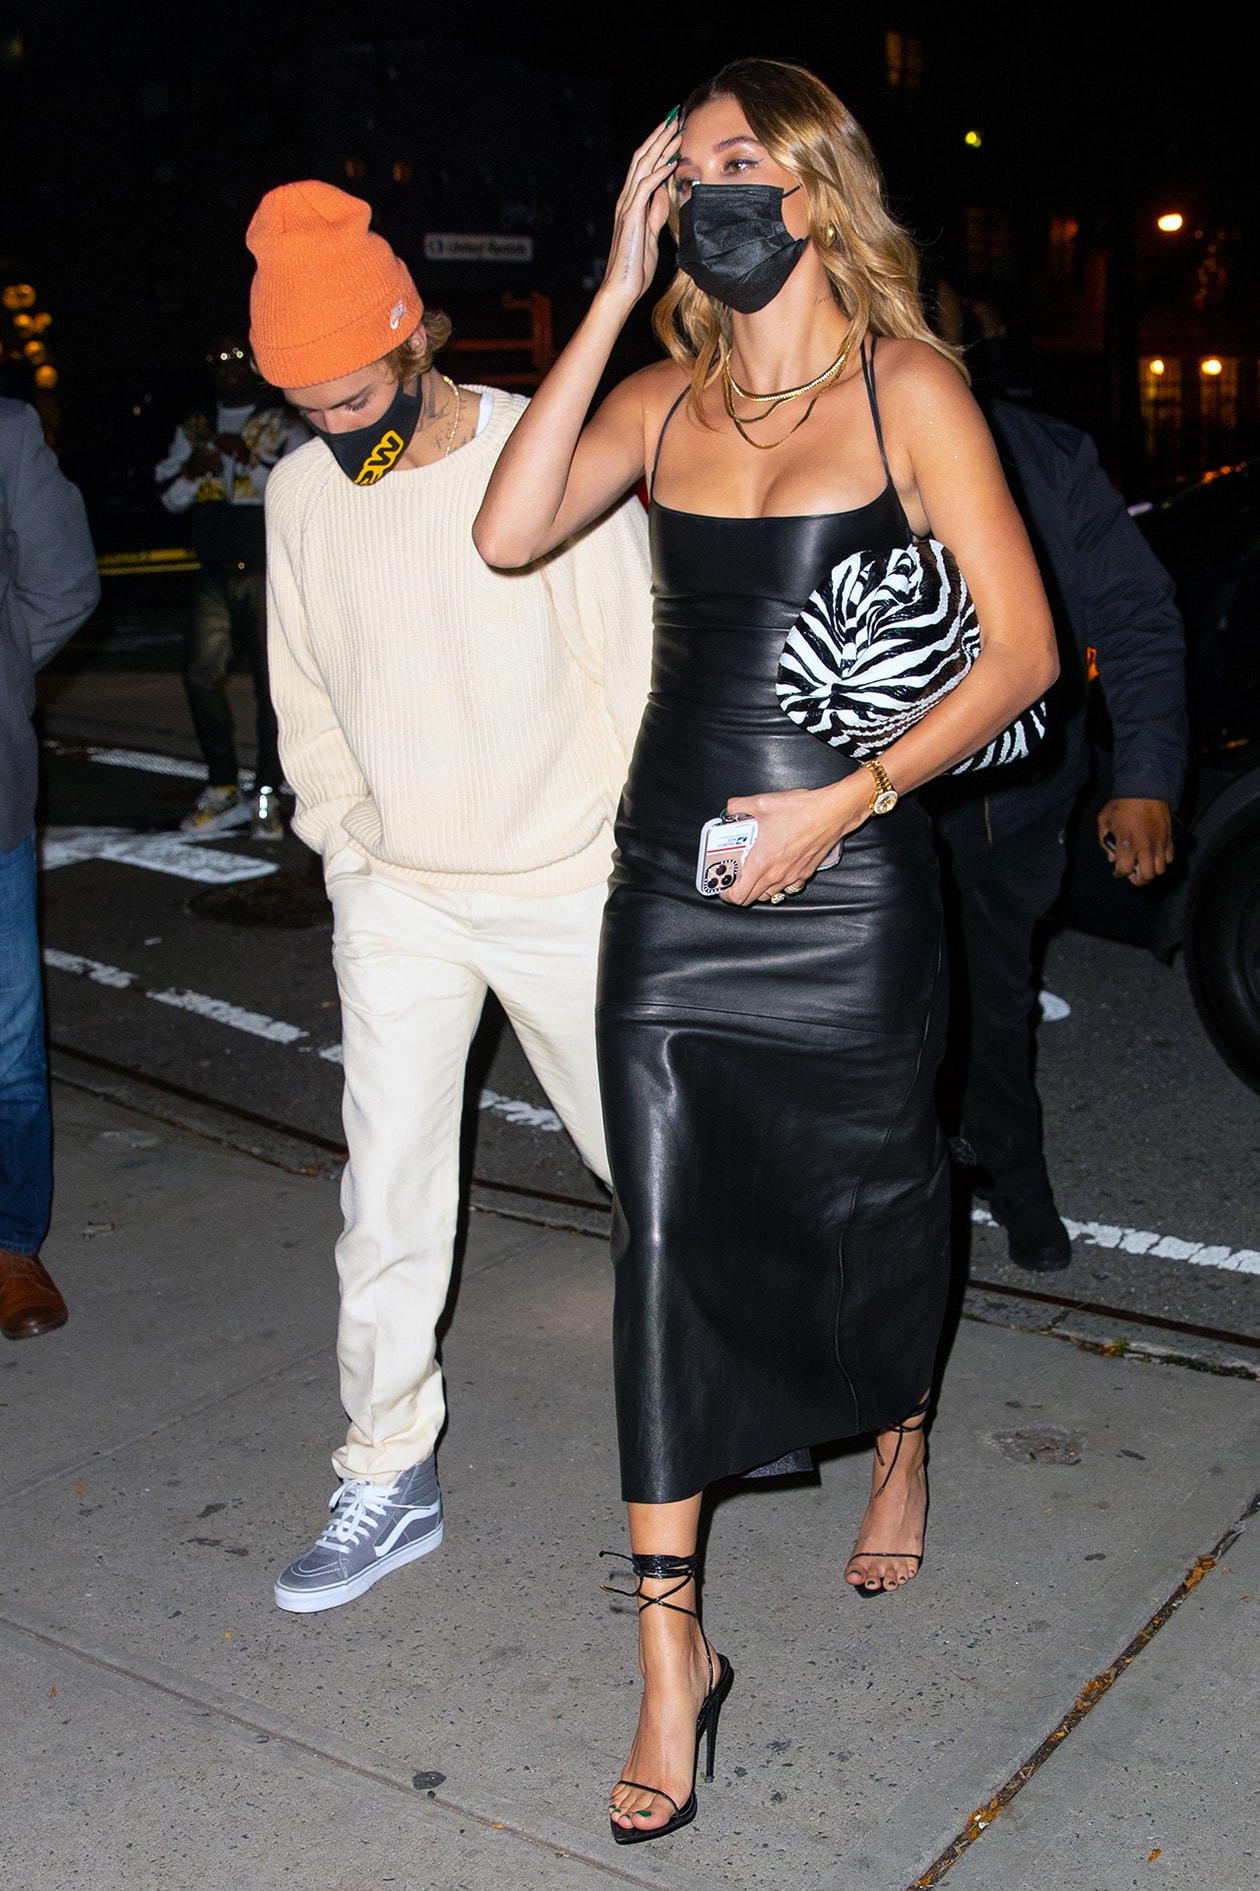 Justin Bieber Hailey Baldwin Husband Wife Celebrity Couple Red Carpet Fashion Looks Street Style Outfits Changes Documentary Premiere